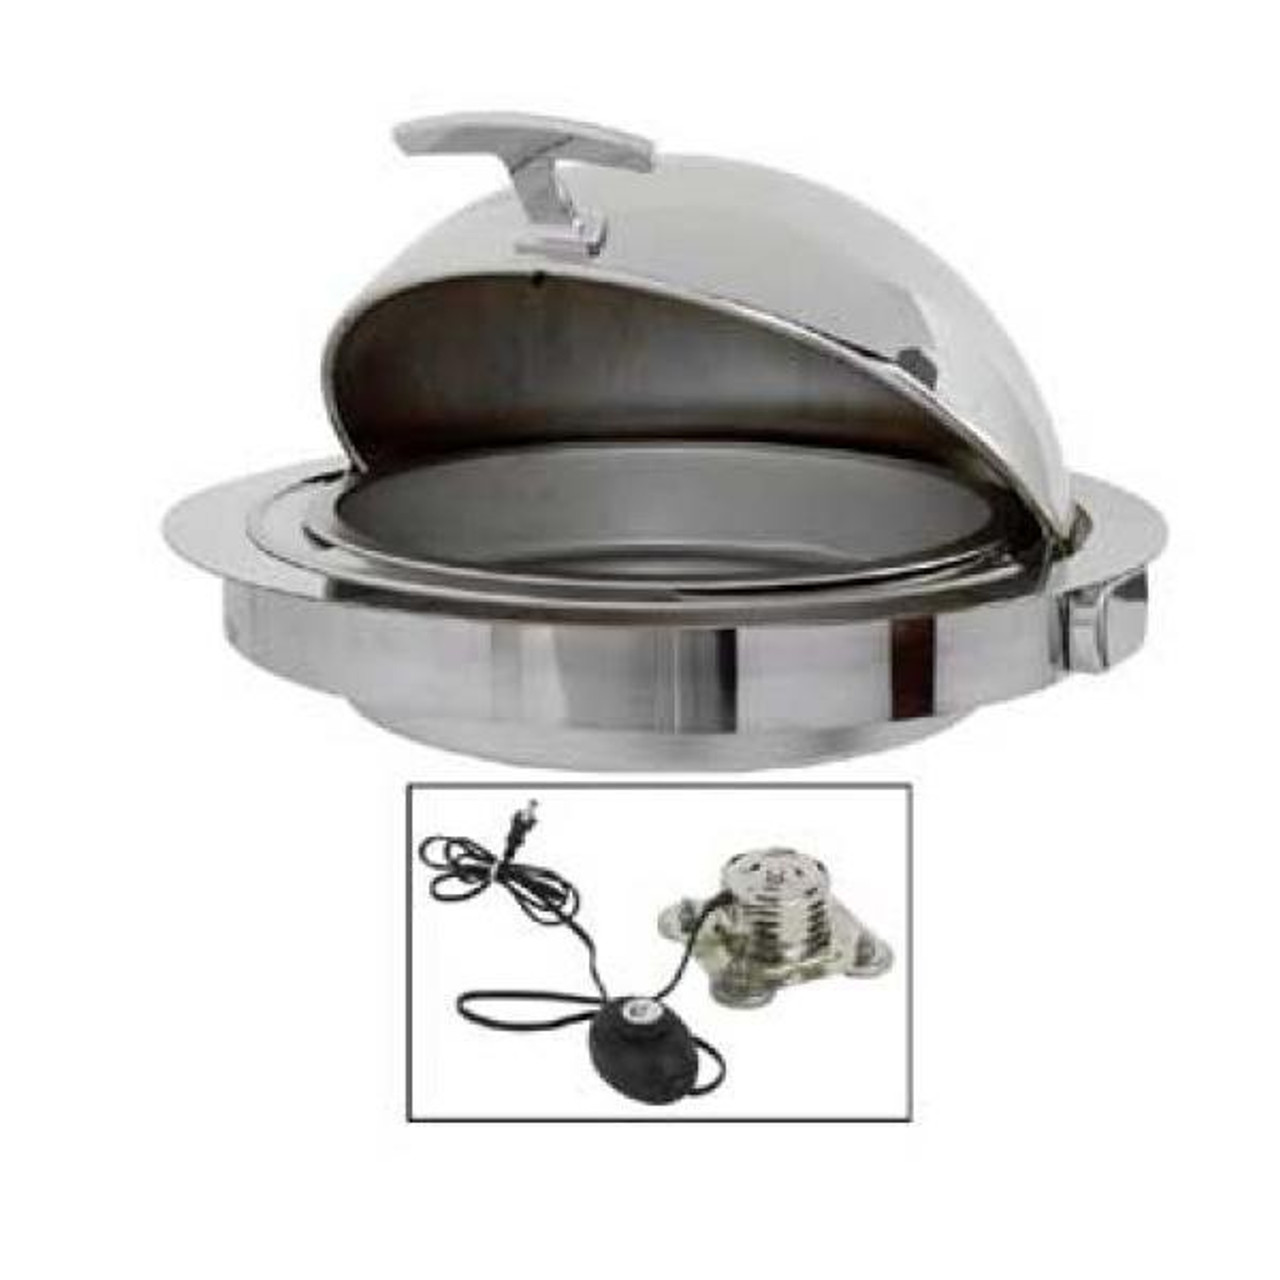 Buffet Enhancements Electric Chafing Dish Counter Drop-In Empire